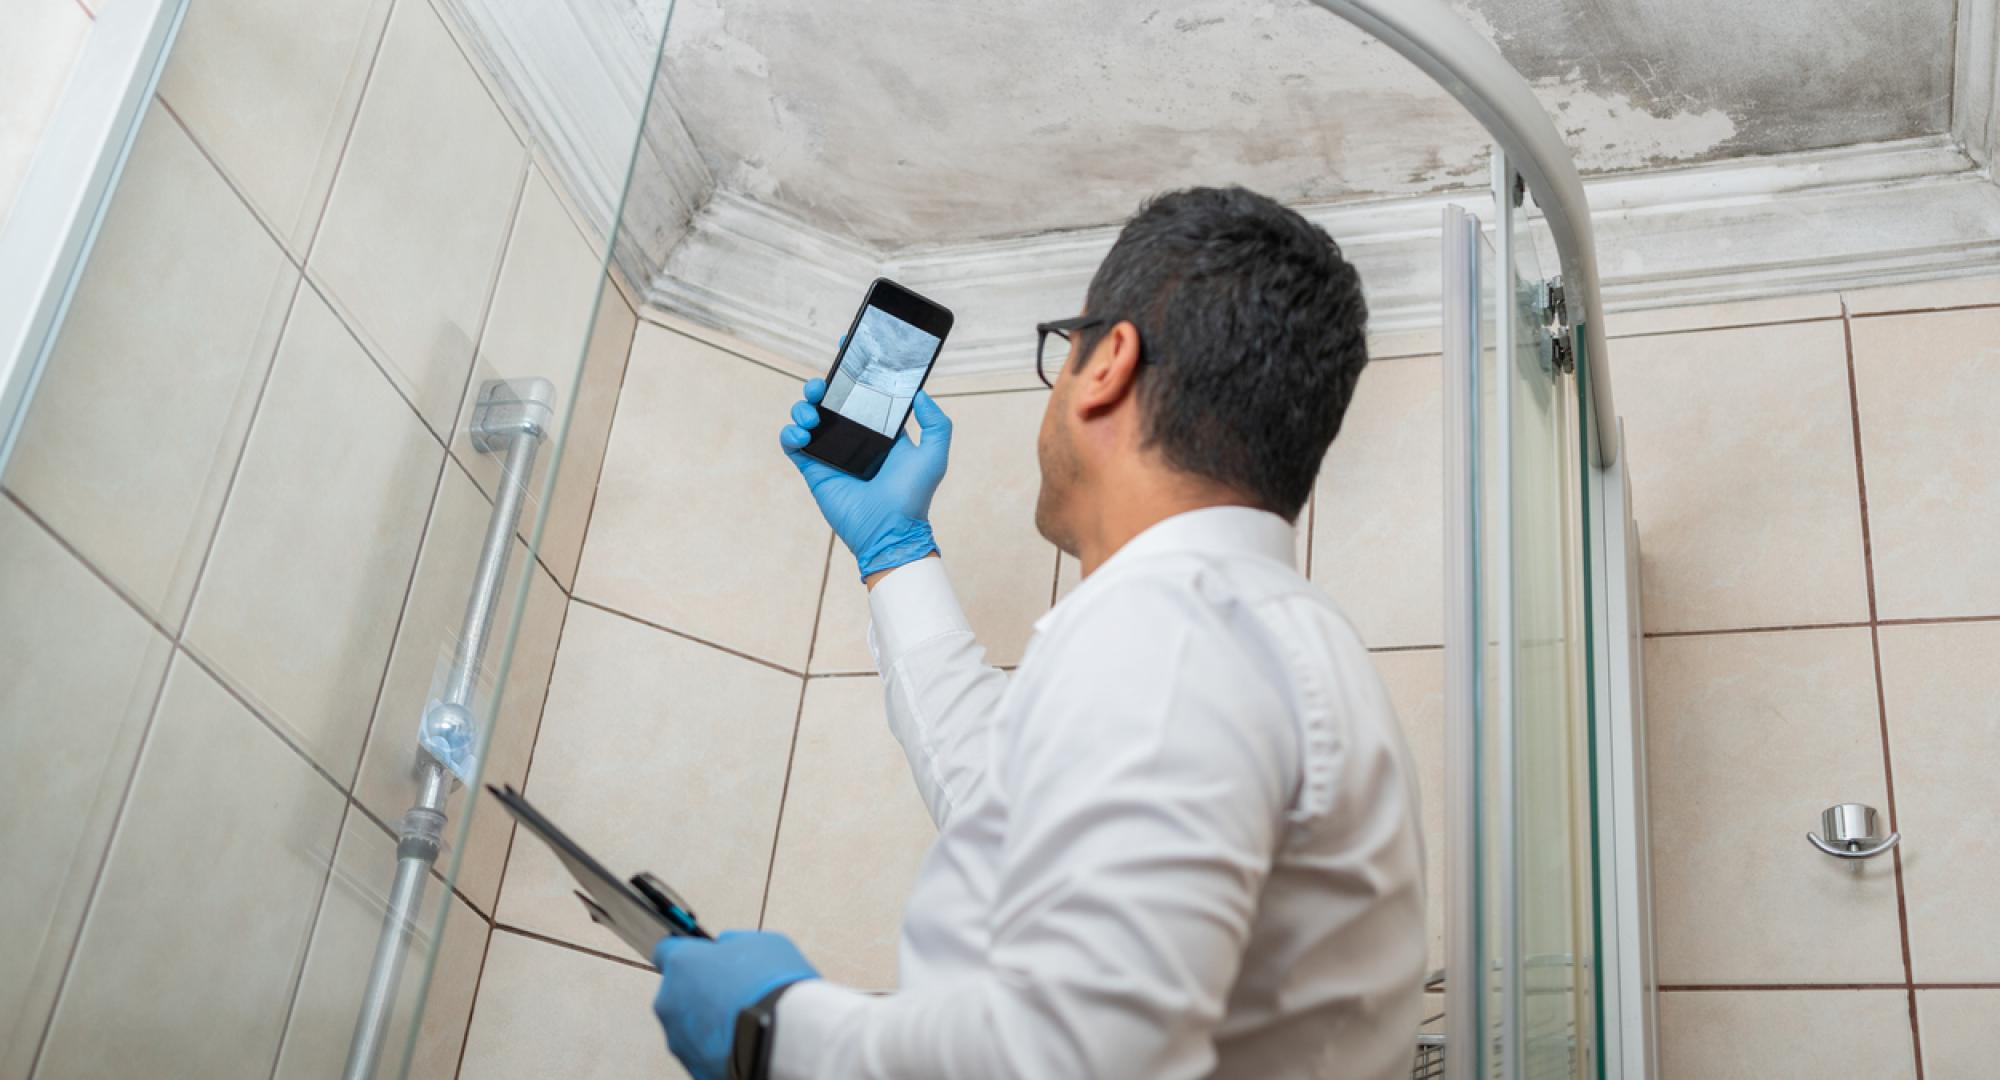 Man checking mould in a shower